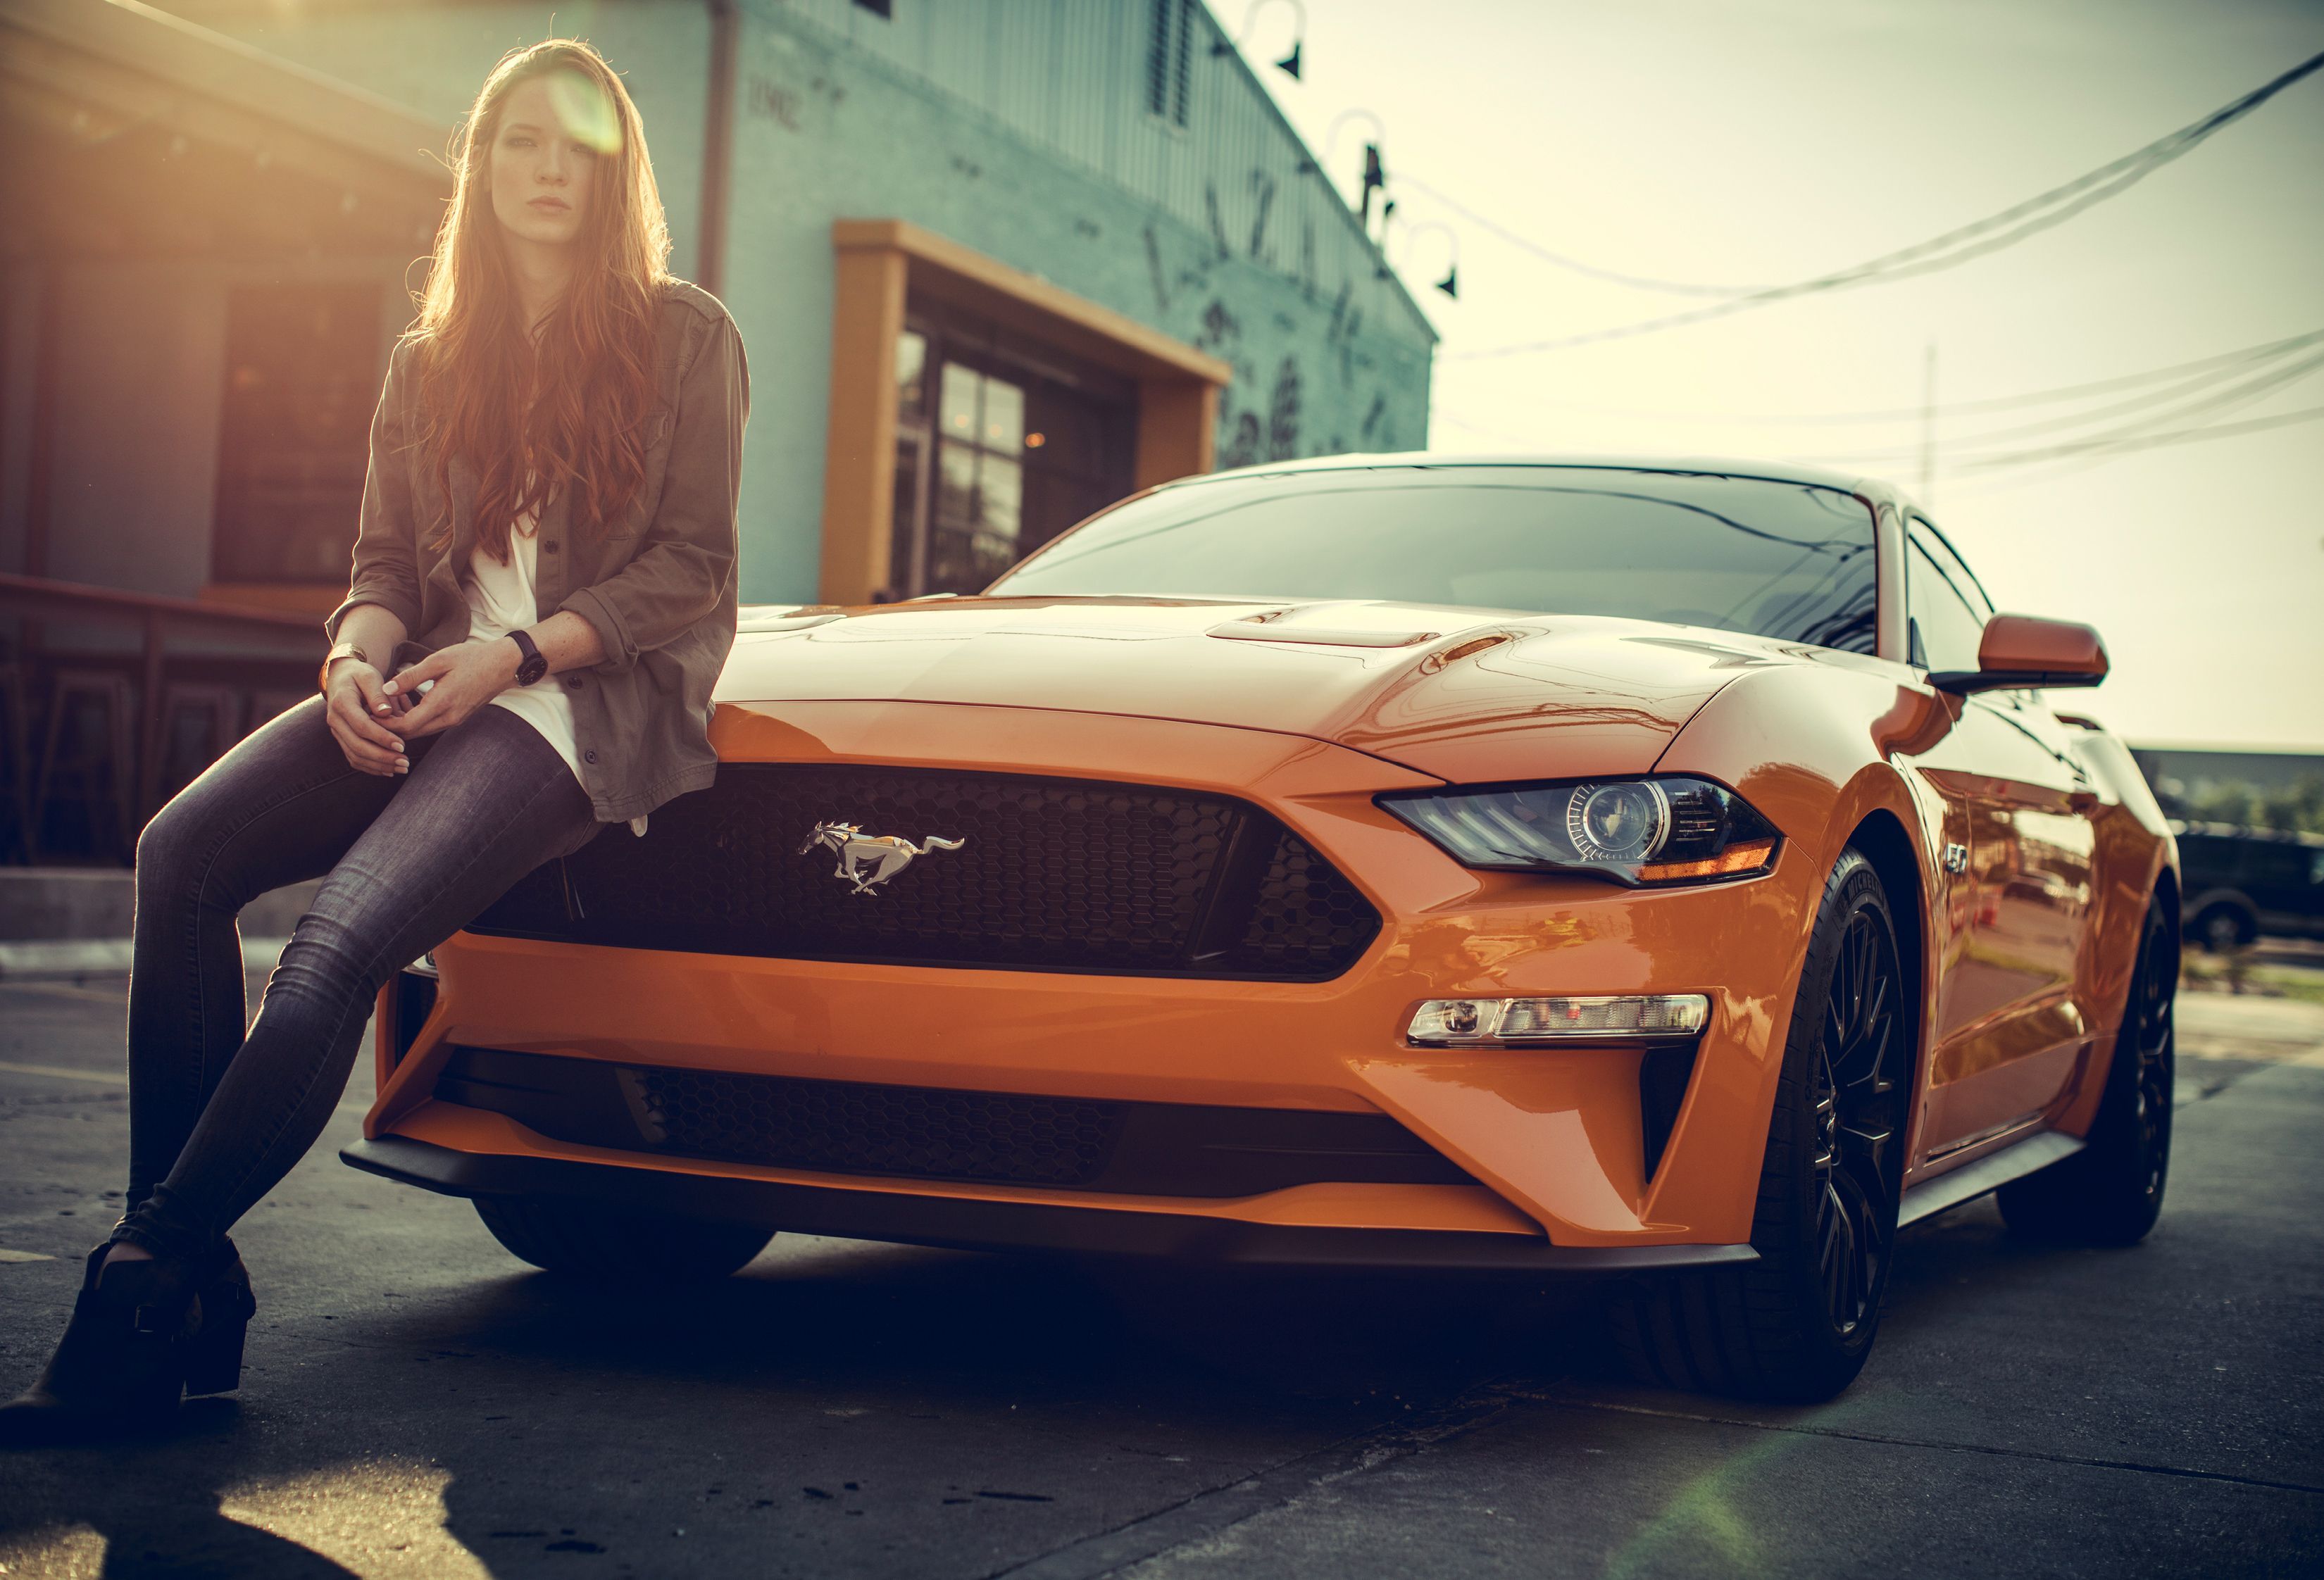 Women and Cars Wallpaper Free Women and Cars Background